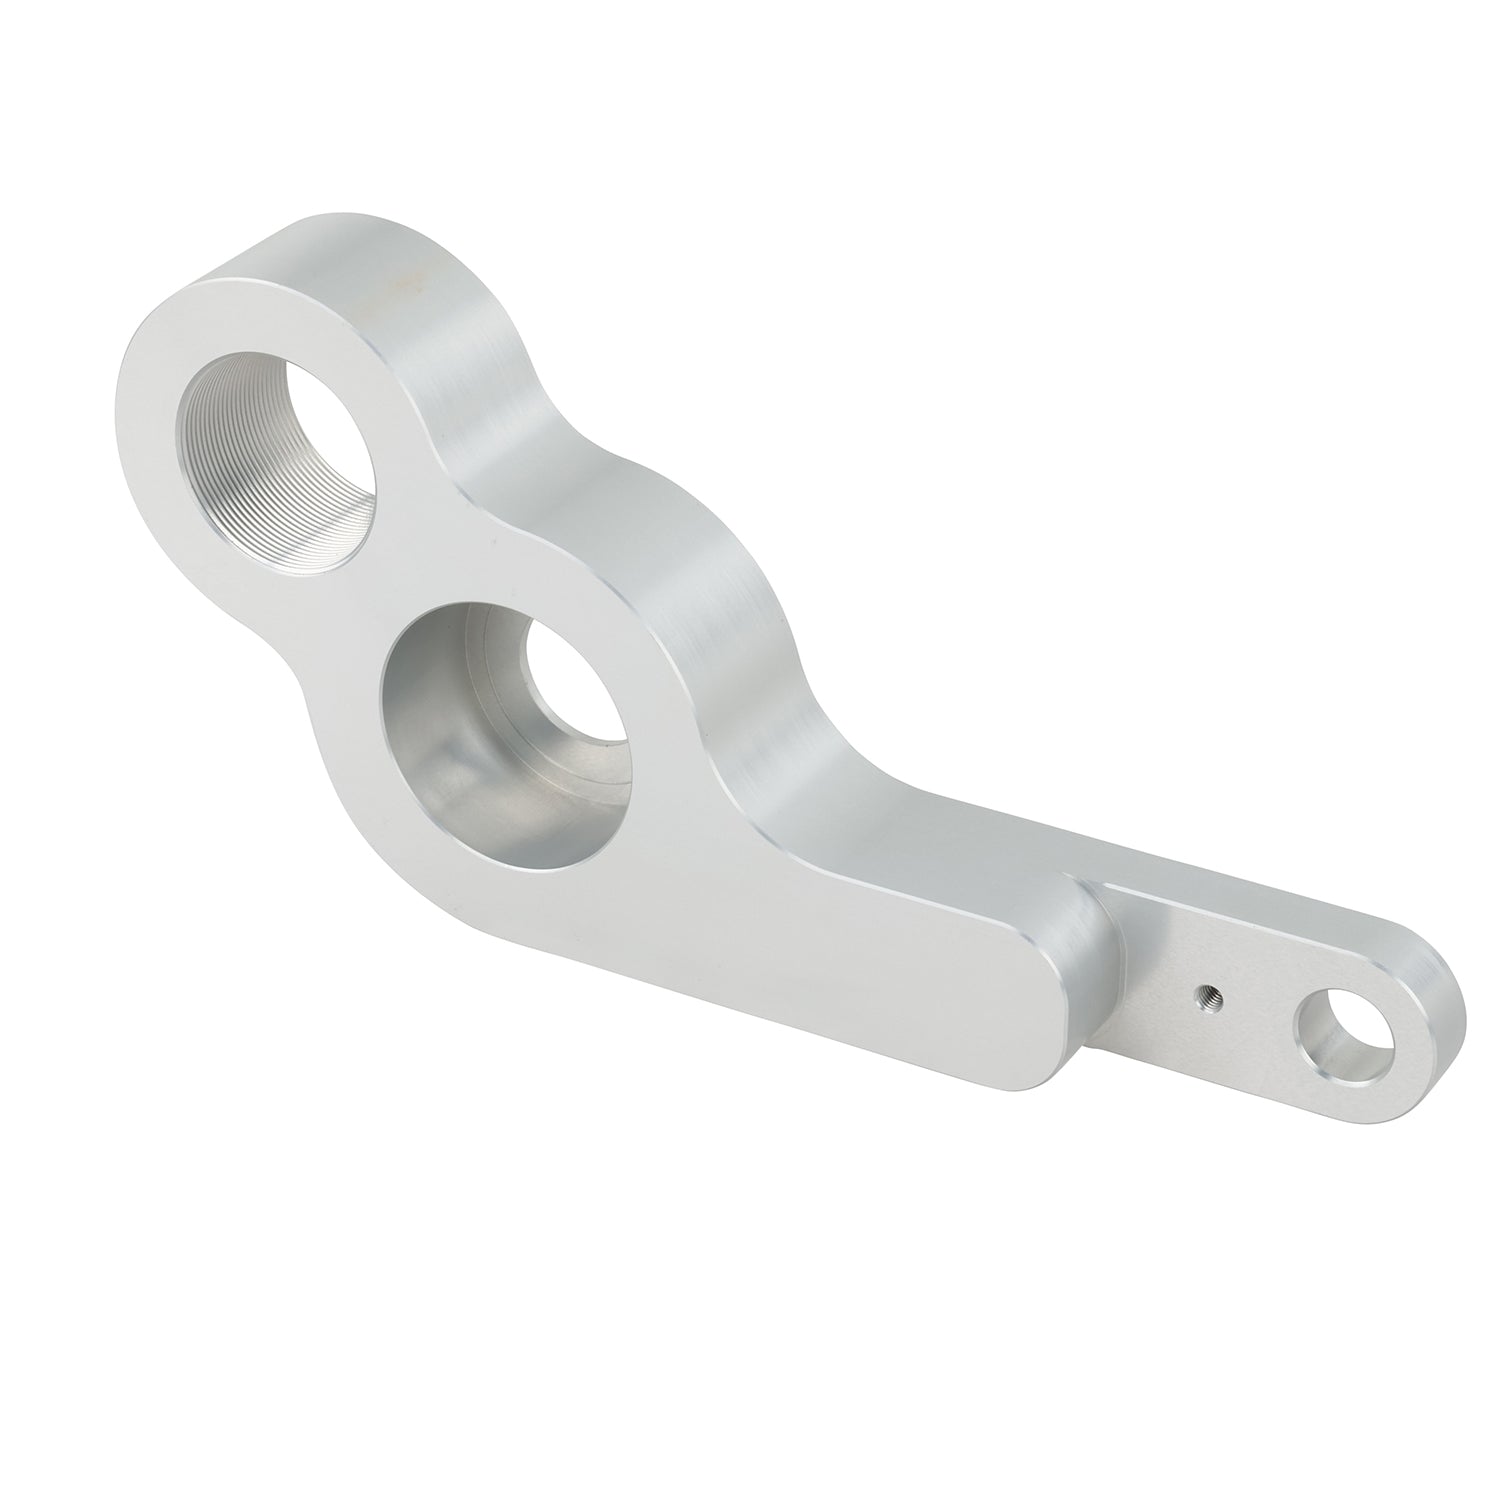 Grey machined swing arm part made of anodized aluminum on white background. 